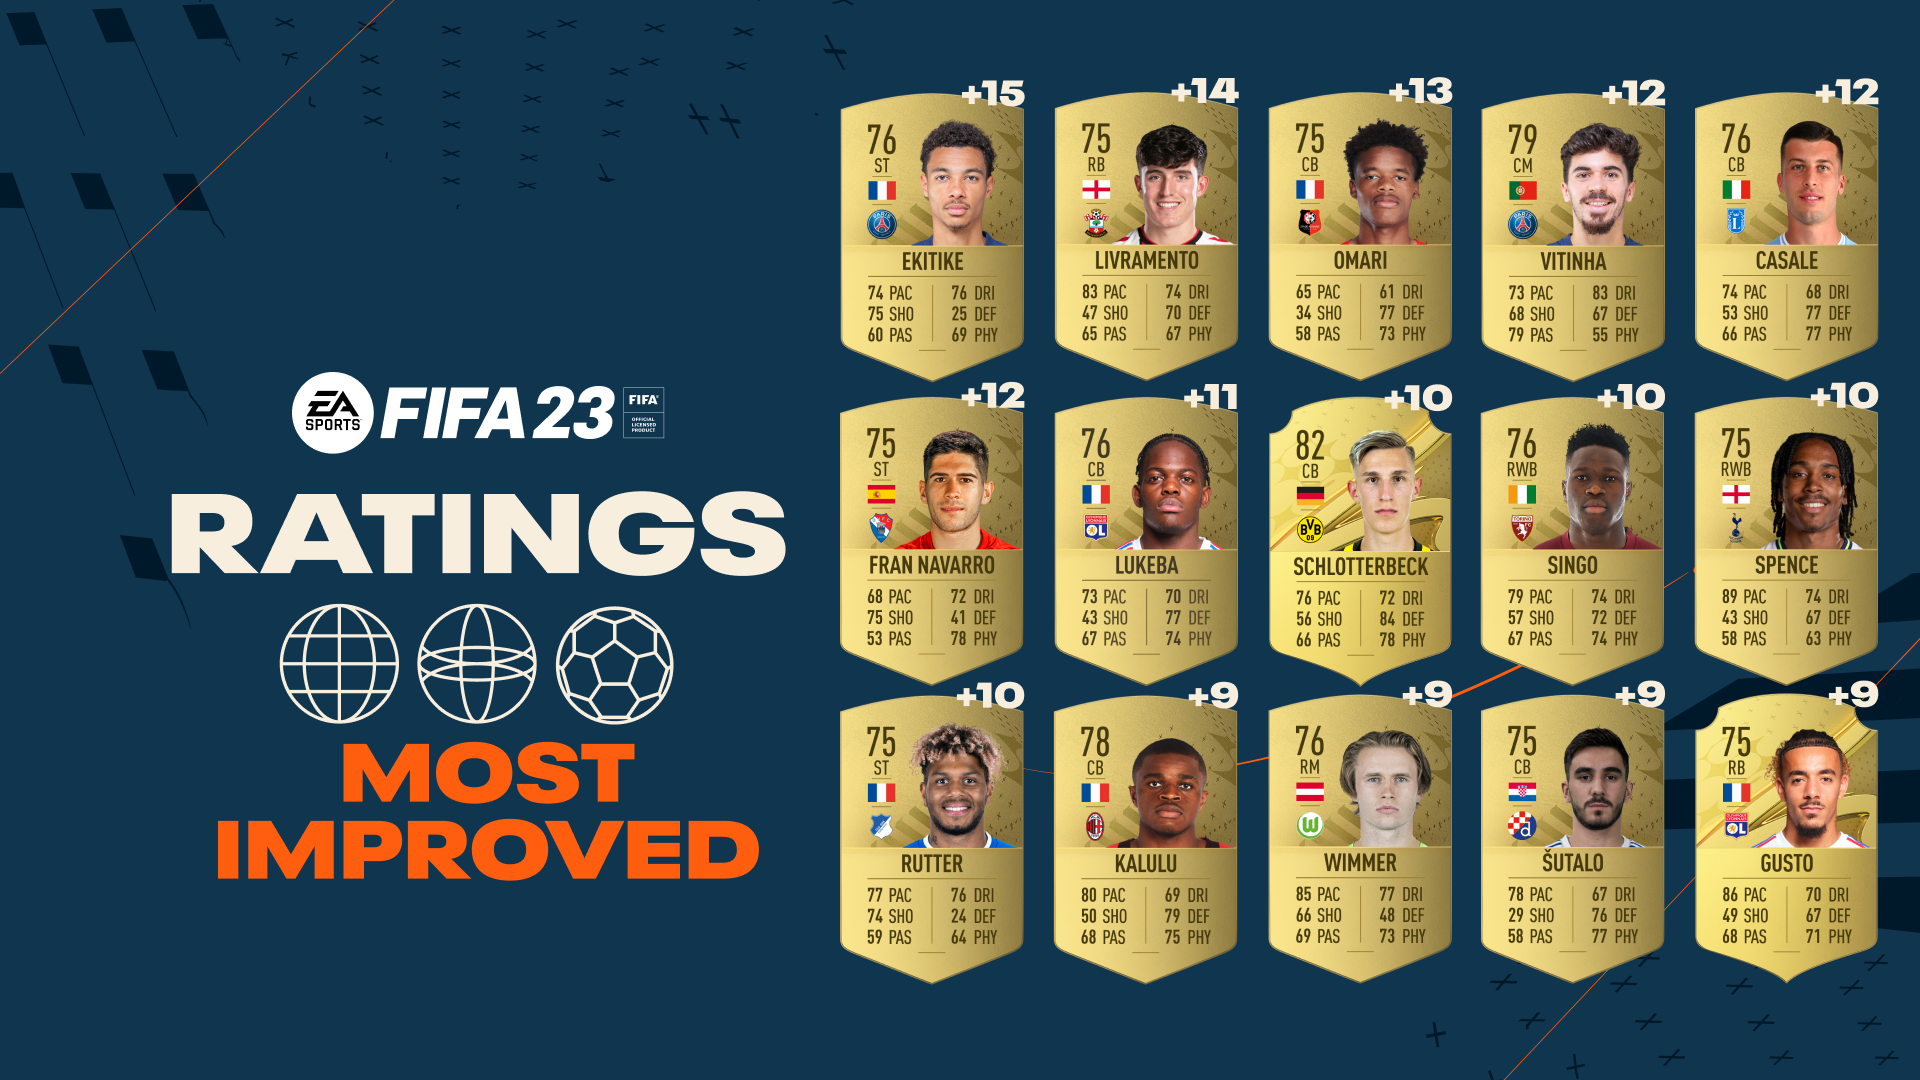 FIFA 23 Points Price List: Latest Changes Explained